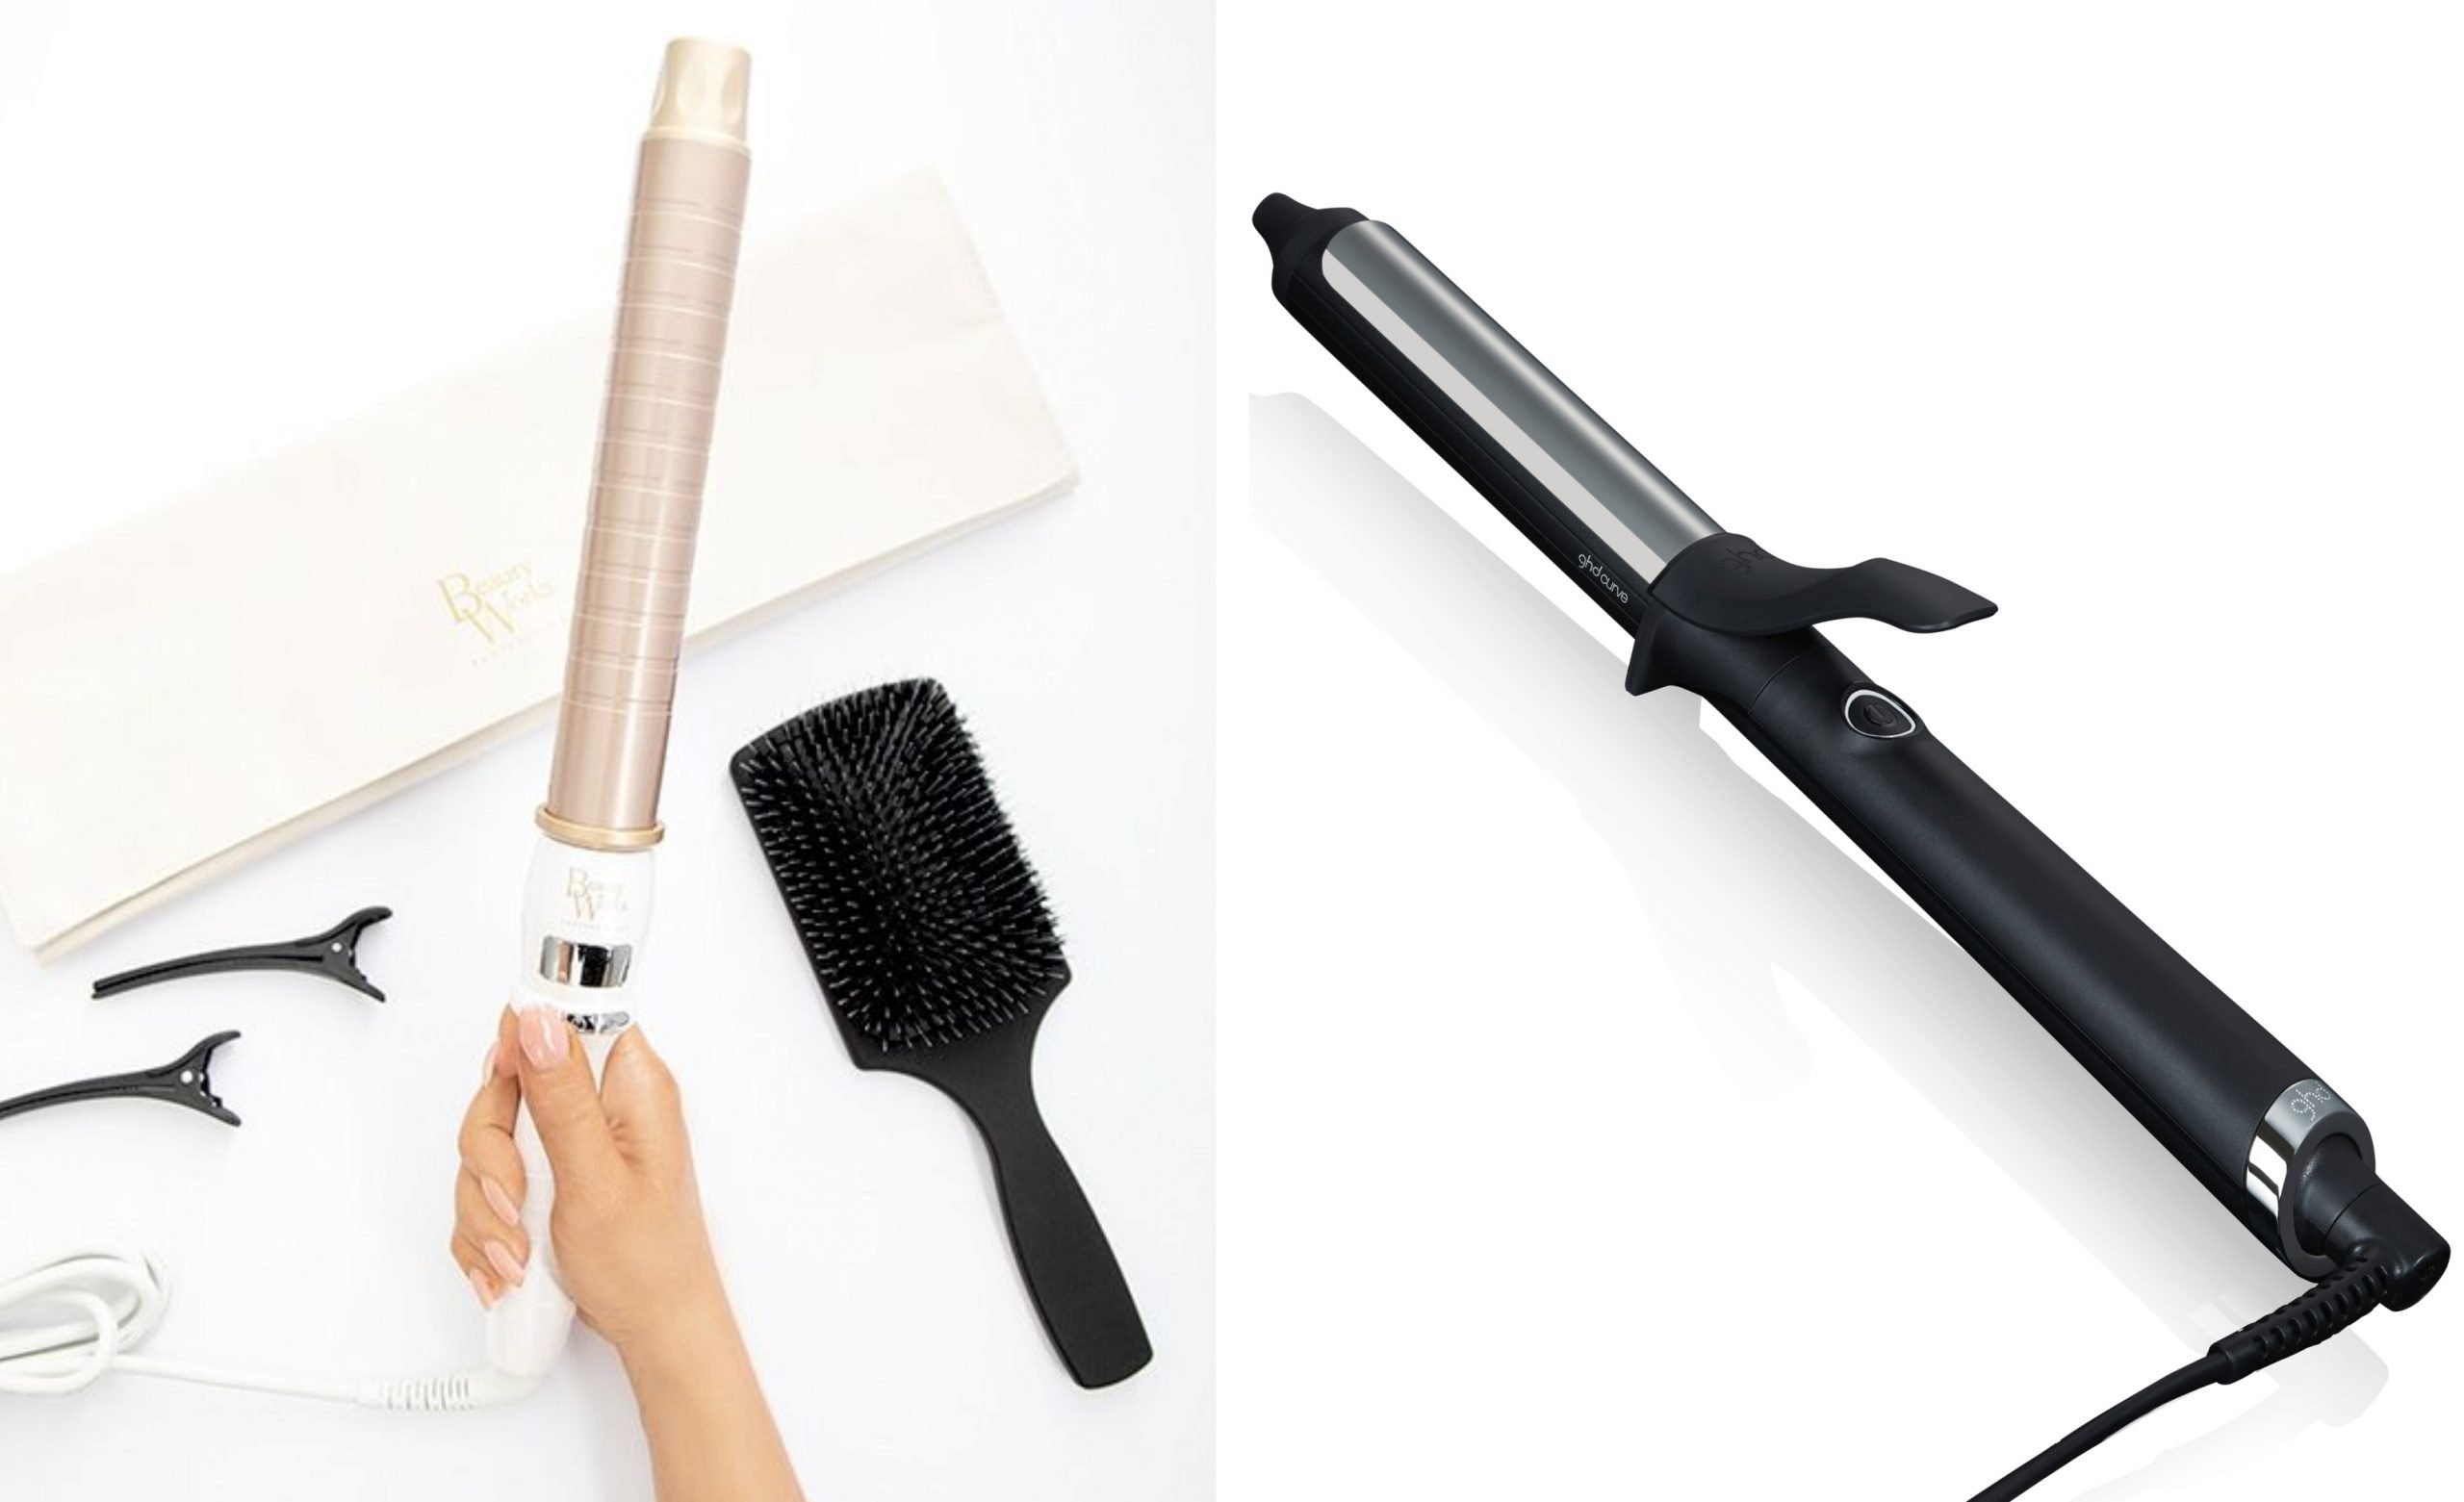 The 10 best curling wands and curling tongs